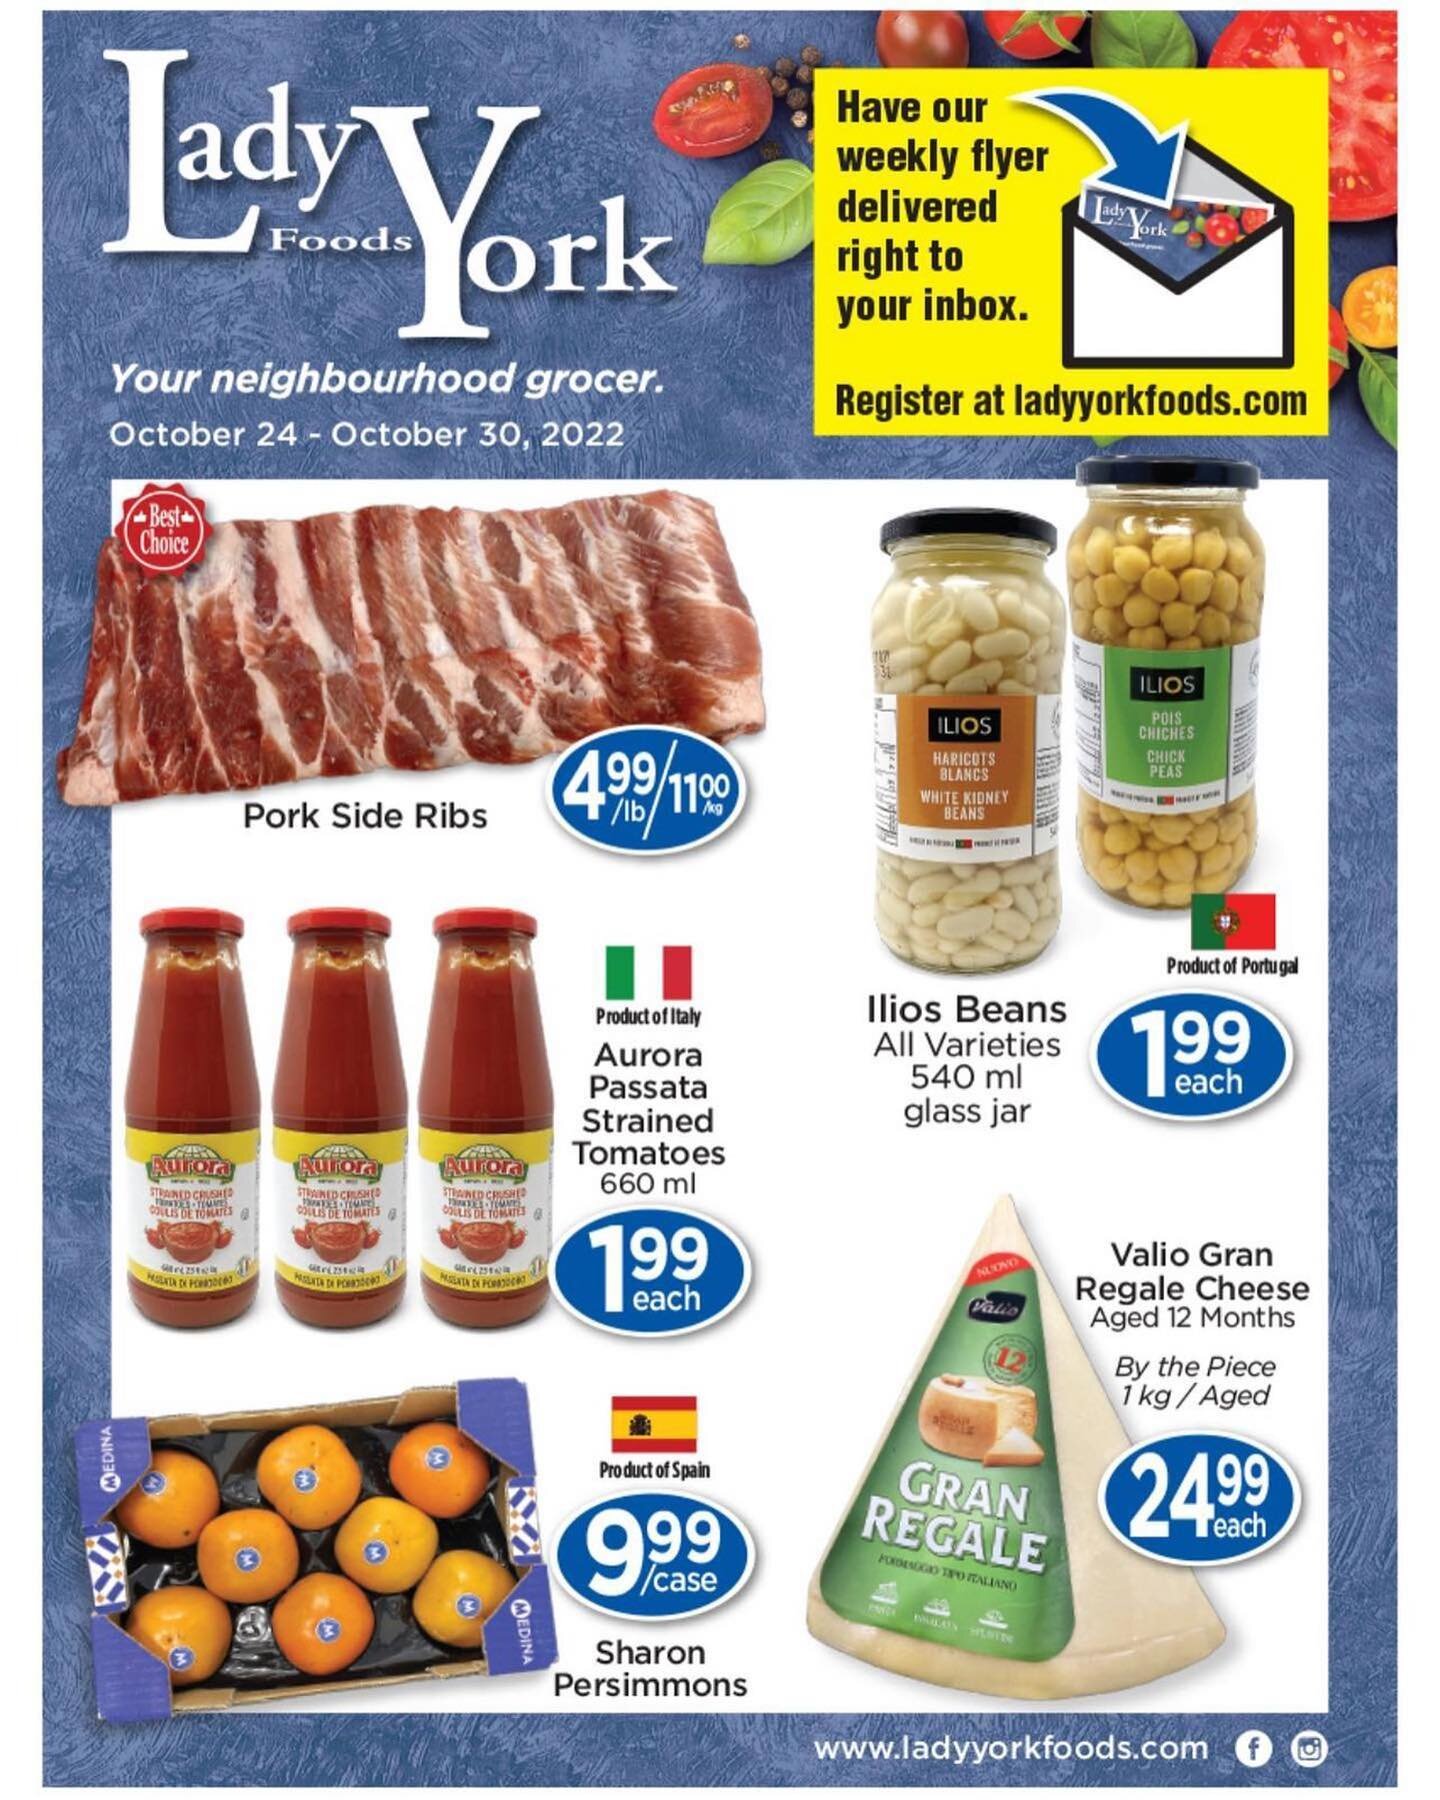 Dont disappoint Nonna by paying full price. 🤌🏼

This week&rsquo;s deals @ladyyorkfoods 🛒🧀🥩

#thatnonnalife 

Via ladyyorkfoods
・・・
Our flyer for the week of October 24th to October 30th ~ Your neighbourhood grocer 🛒 

#ladyyorkfoods #familybusi